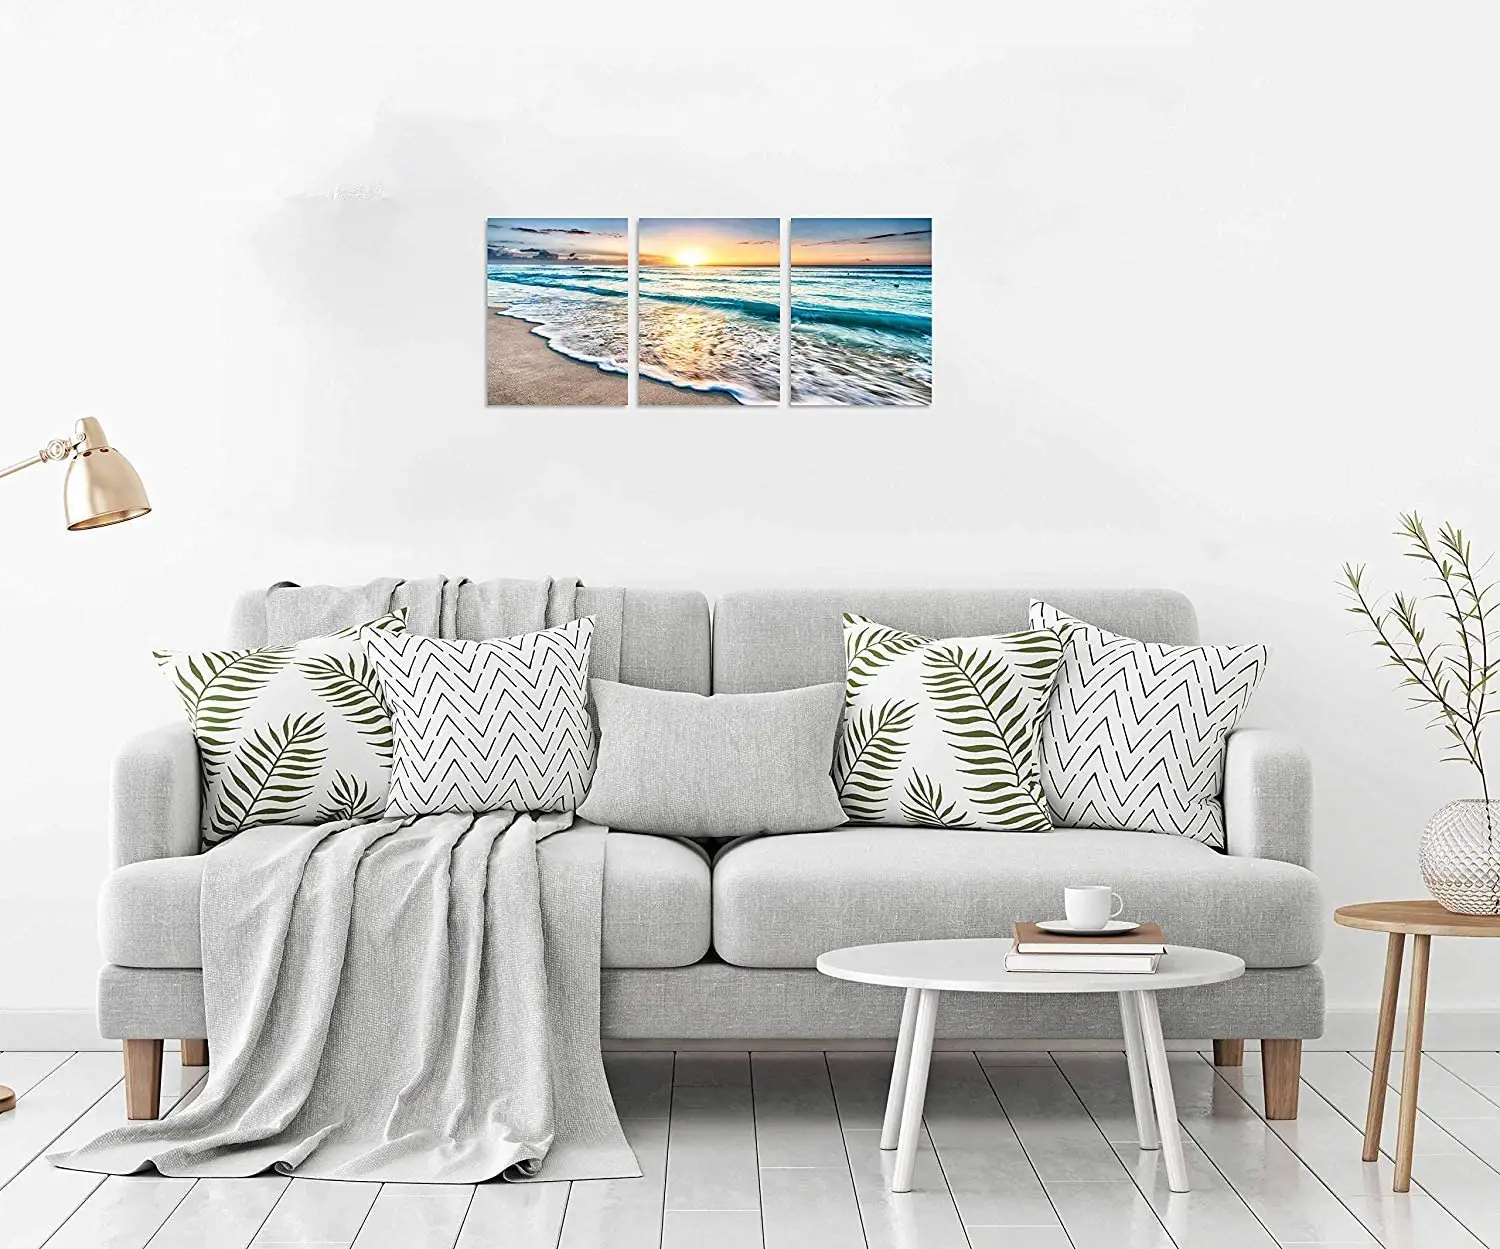 3 Panel Beach Canvas Wall Art For Home Decor Blue Sea Sunset Seascape The Pictures For Home Decor Decoration